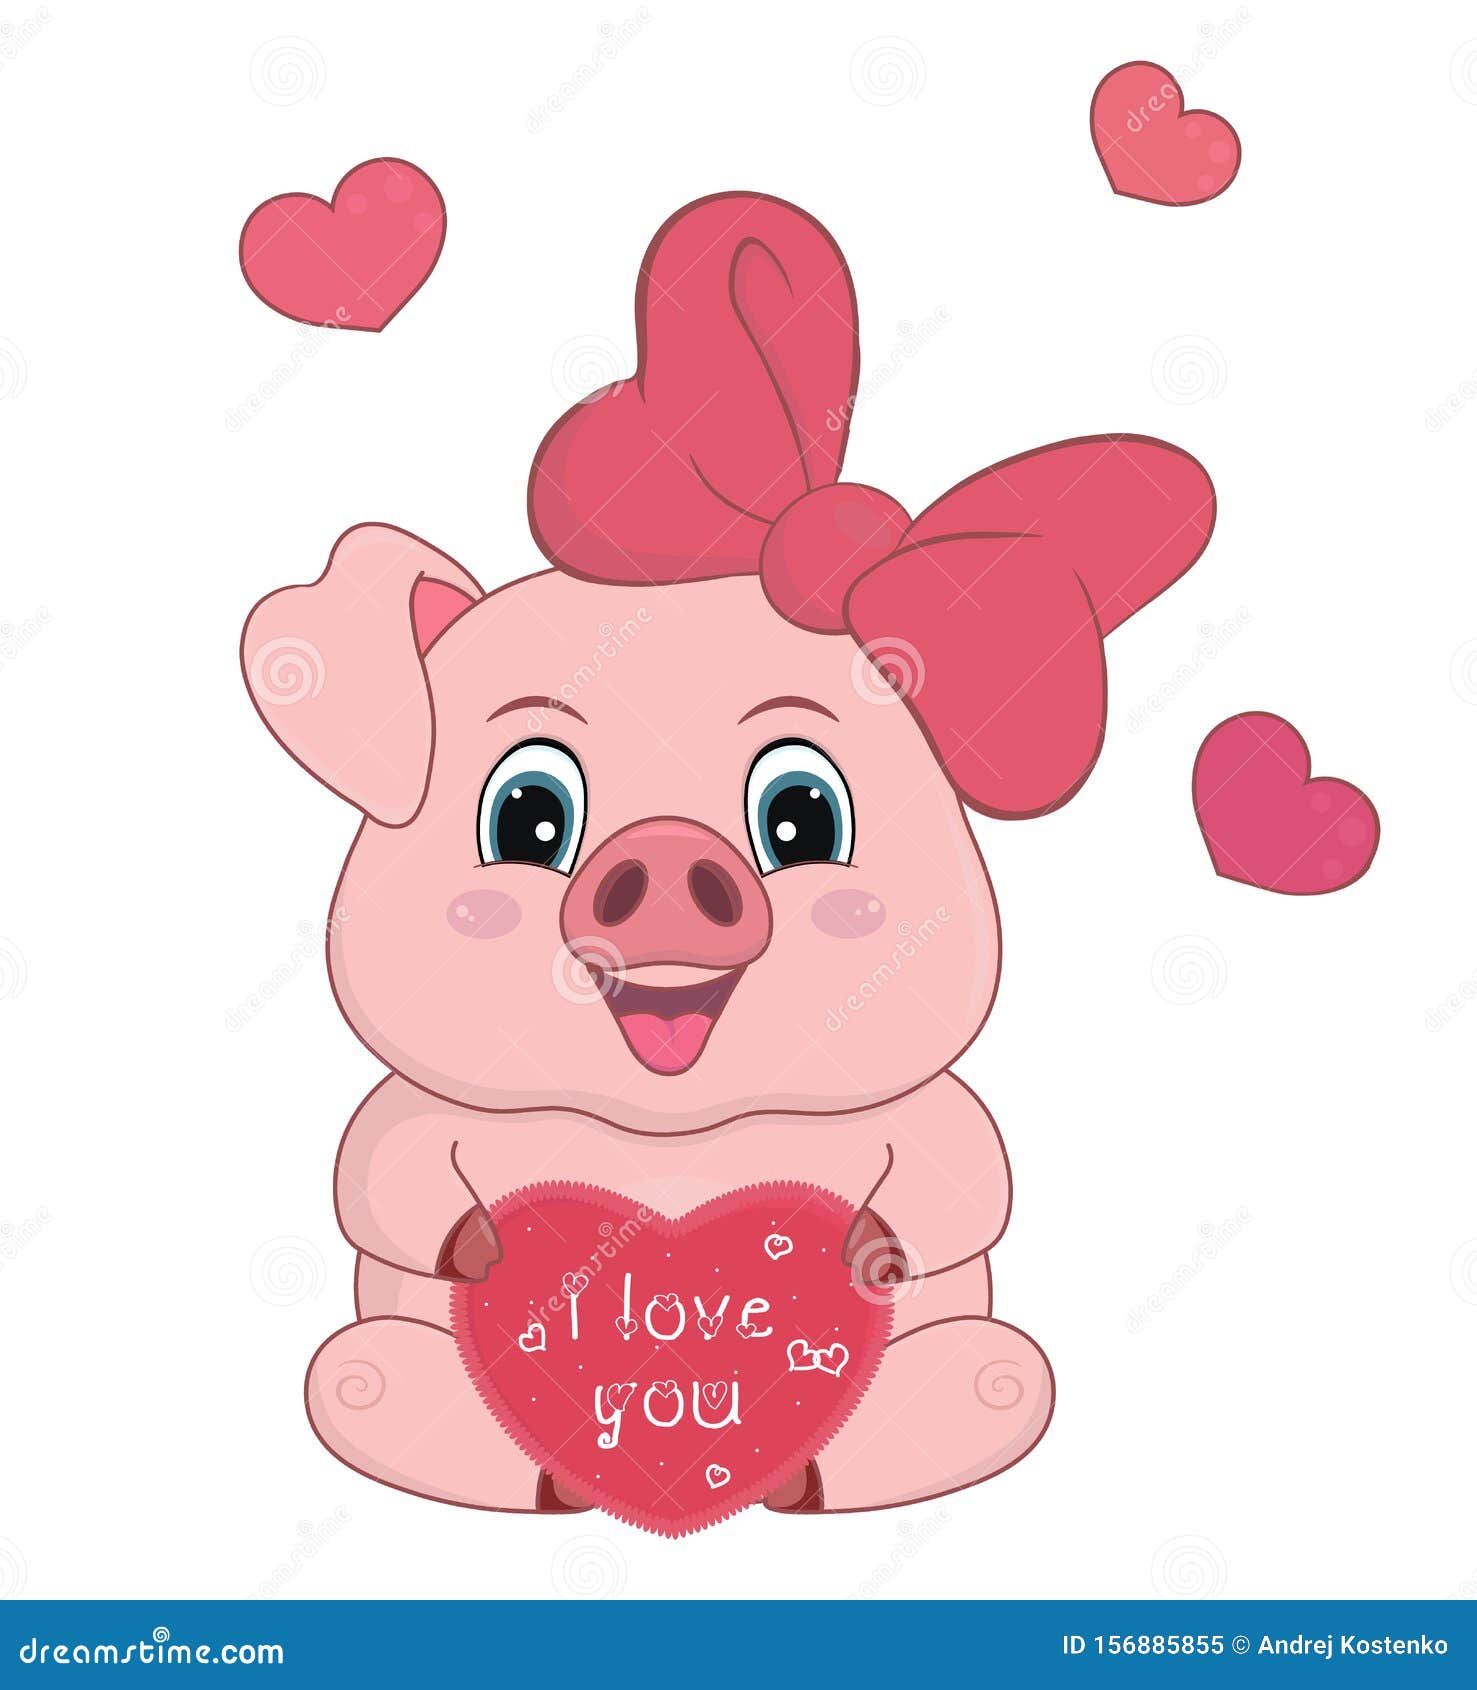 Cute Cartoon Pig with Pink Big Heart and Text I Love You for Design Stock  Illustration - Illustration of adorable, emoticons: 156885855